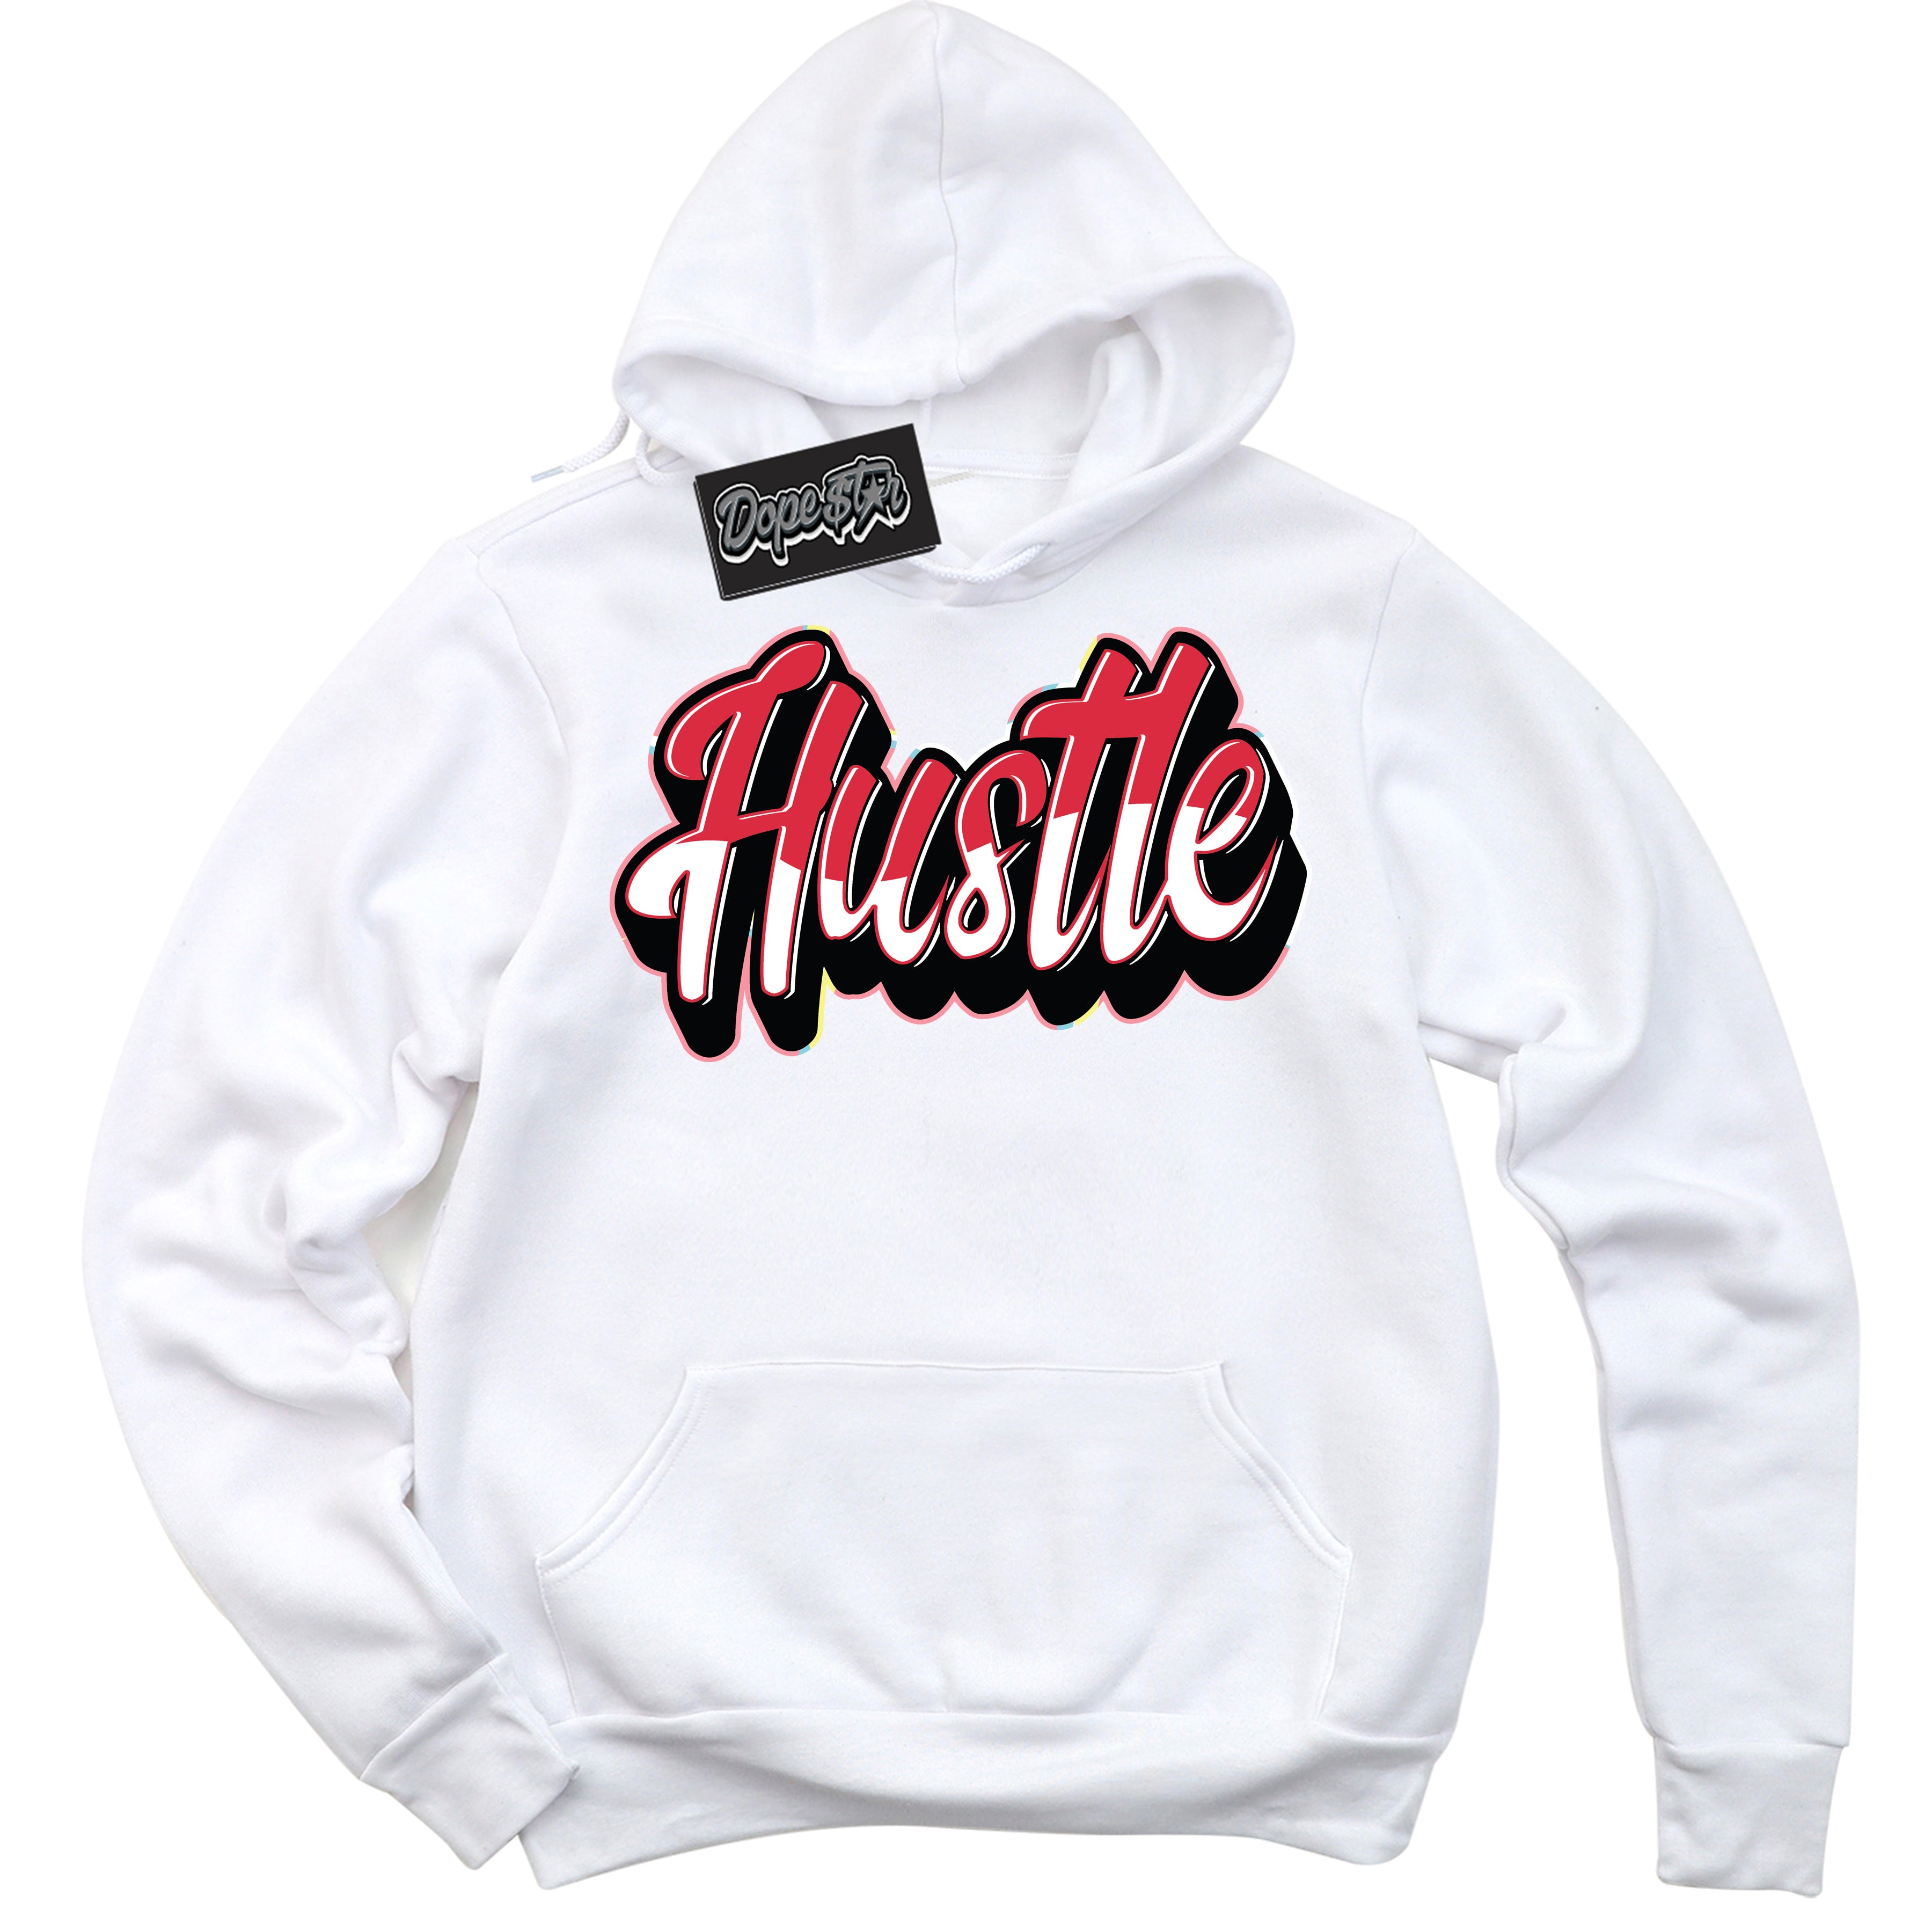 Cool White Graphic DopeStar Hoodie with “ Hustle “ print, that perfectly matches Spider-Verse 1s sneakers